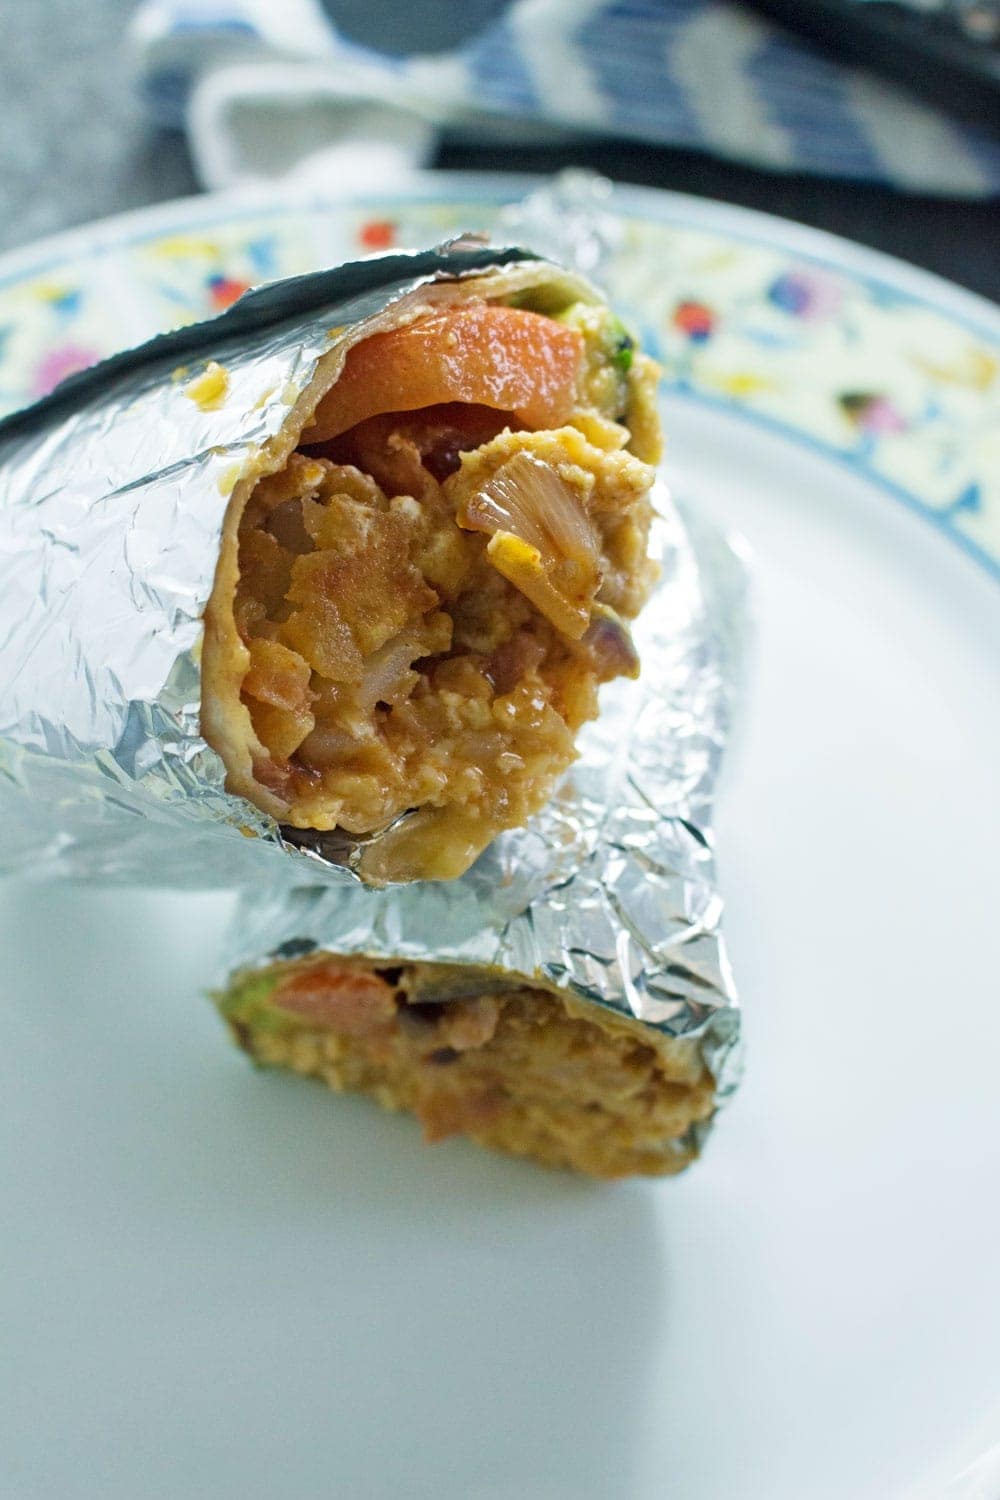 This breakfast burrito stuffed with bacon, egg and hash browns give you the perfect start to the day! They're an impressive but easy to make breakfast.